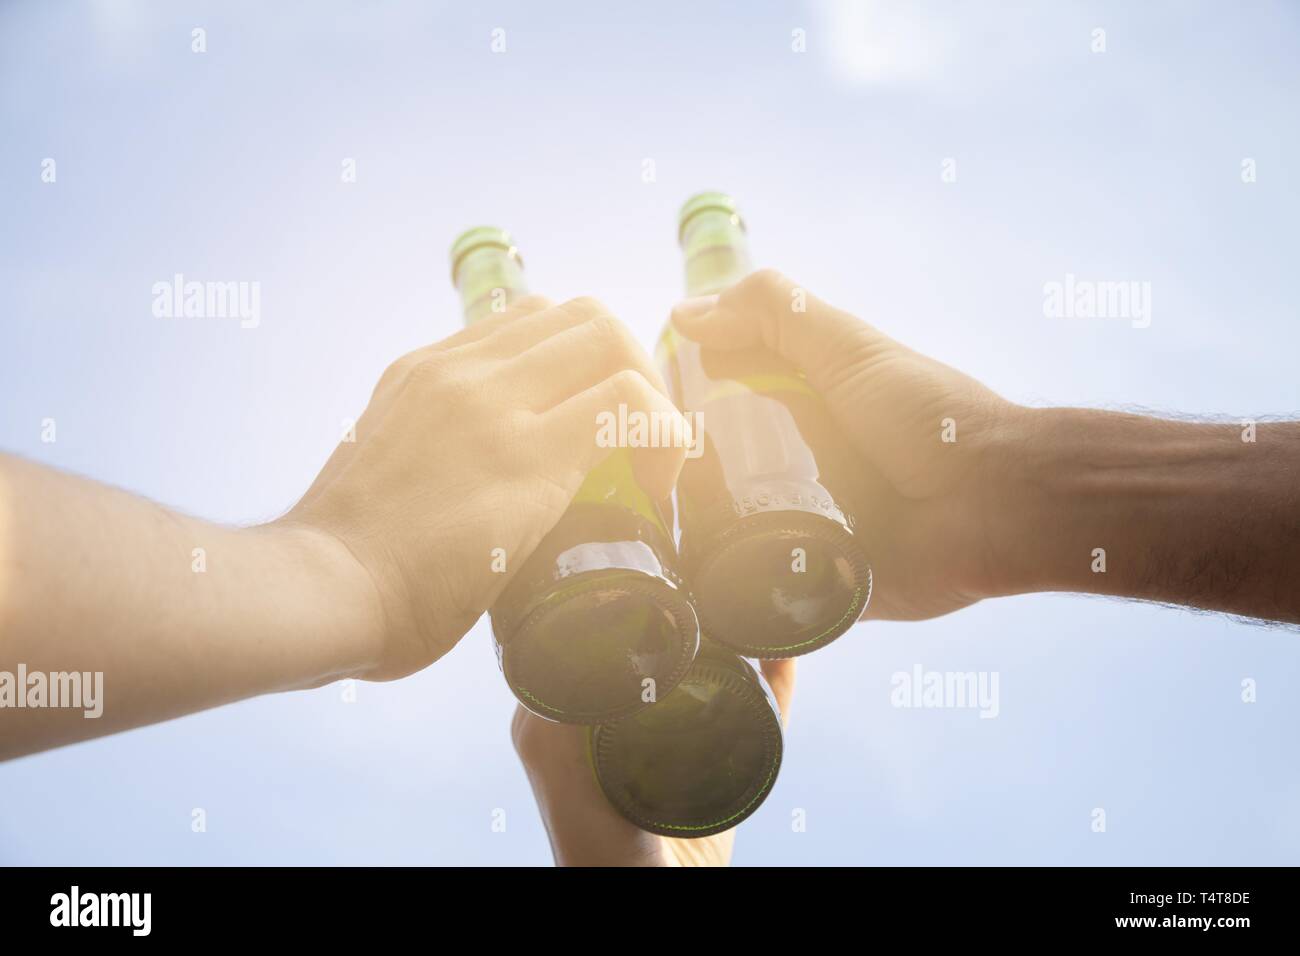 Make a toast with beer bottles, Germany Stock Photo